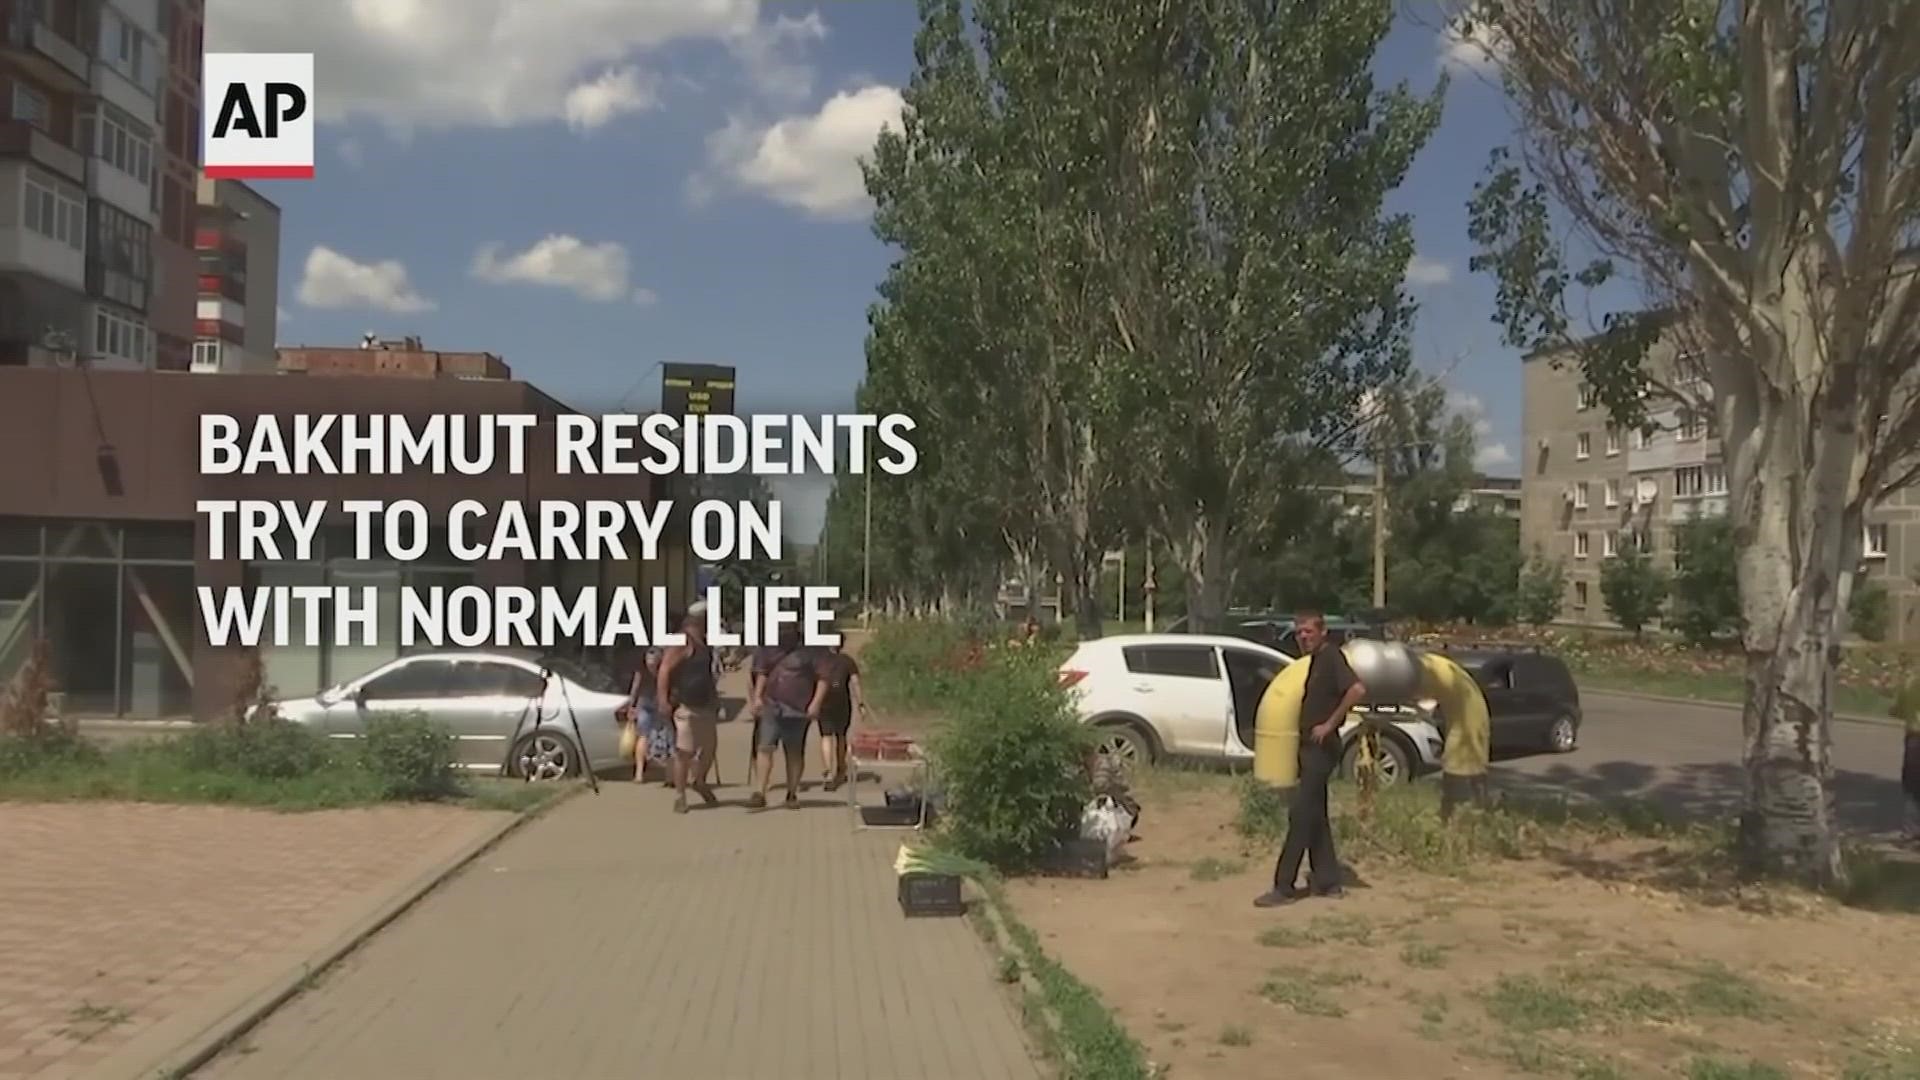 WATCH: Under a sky filled with the sound of missiles soaring overhead, people in the eastern Ukrainian city of Bakhmut try to carry on with normal life.